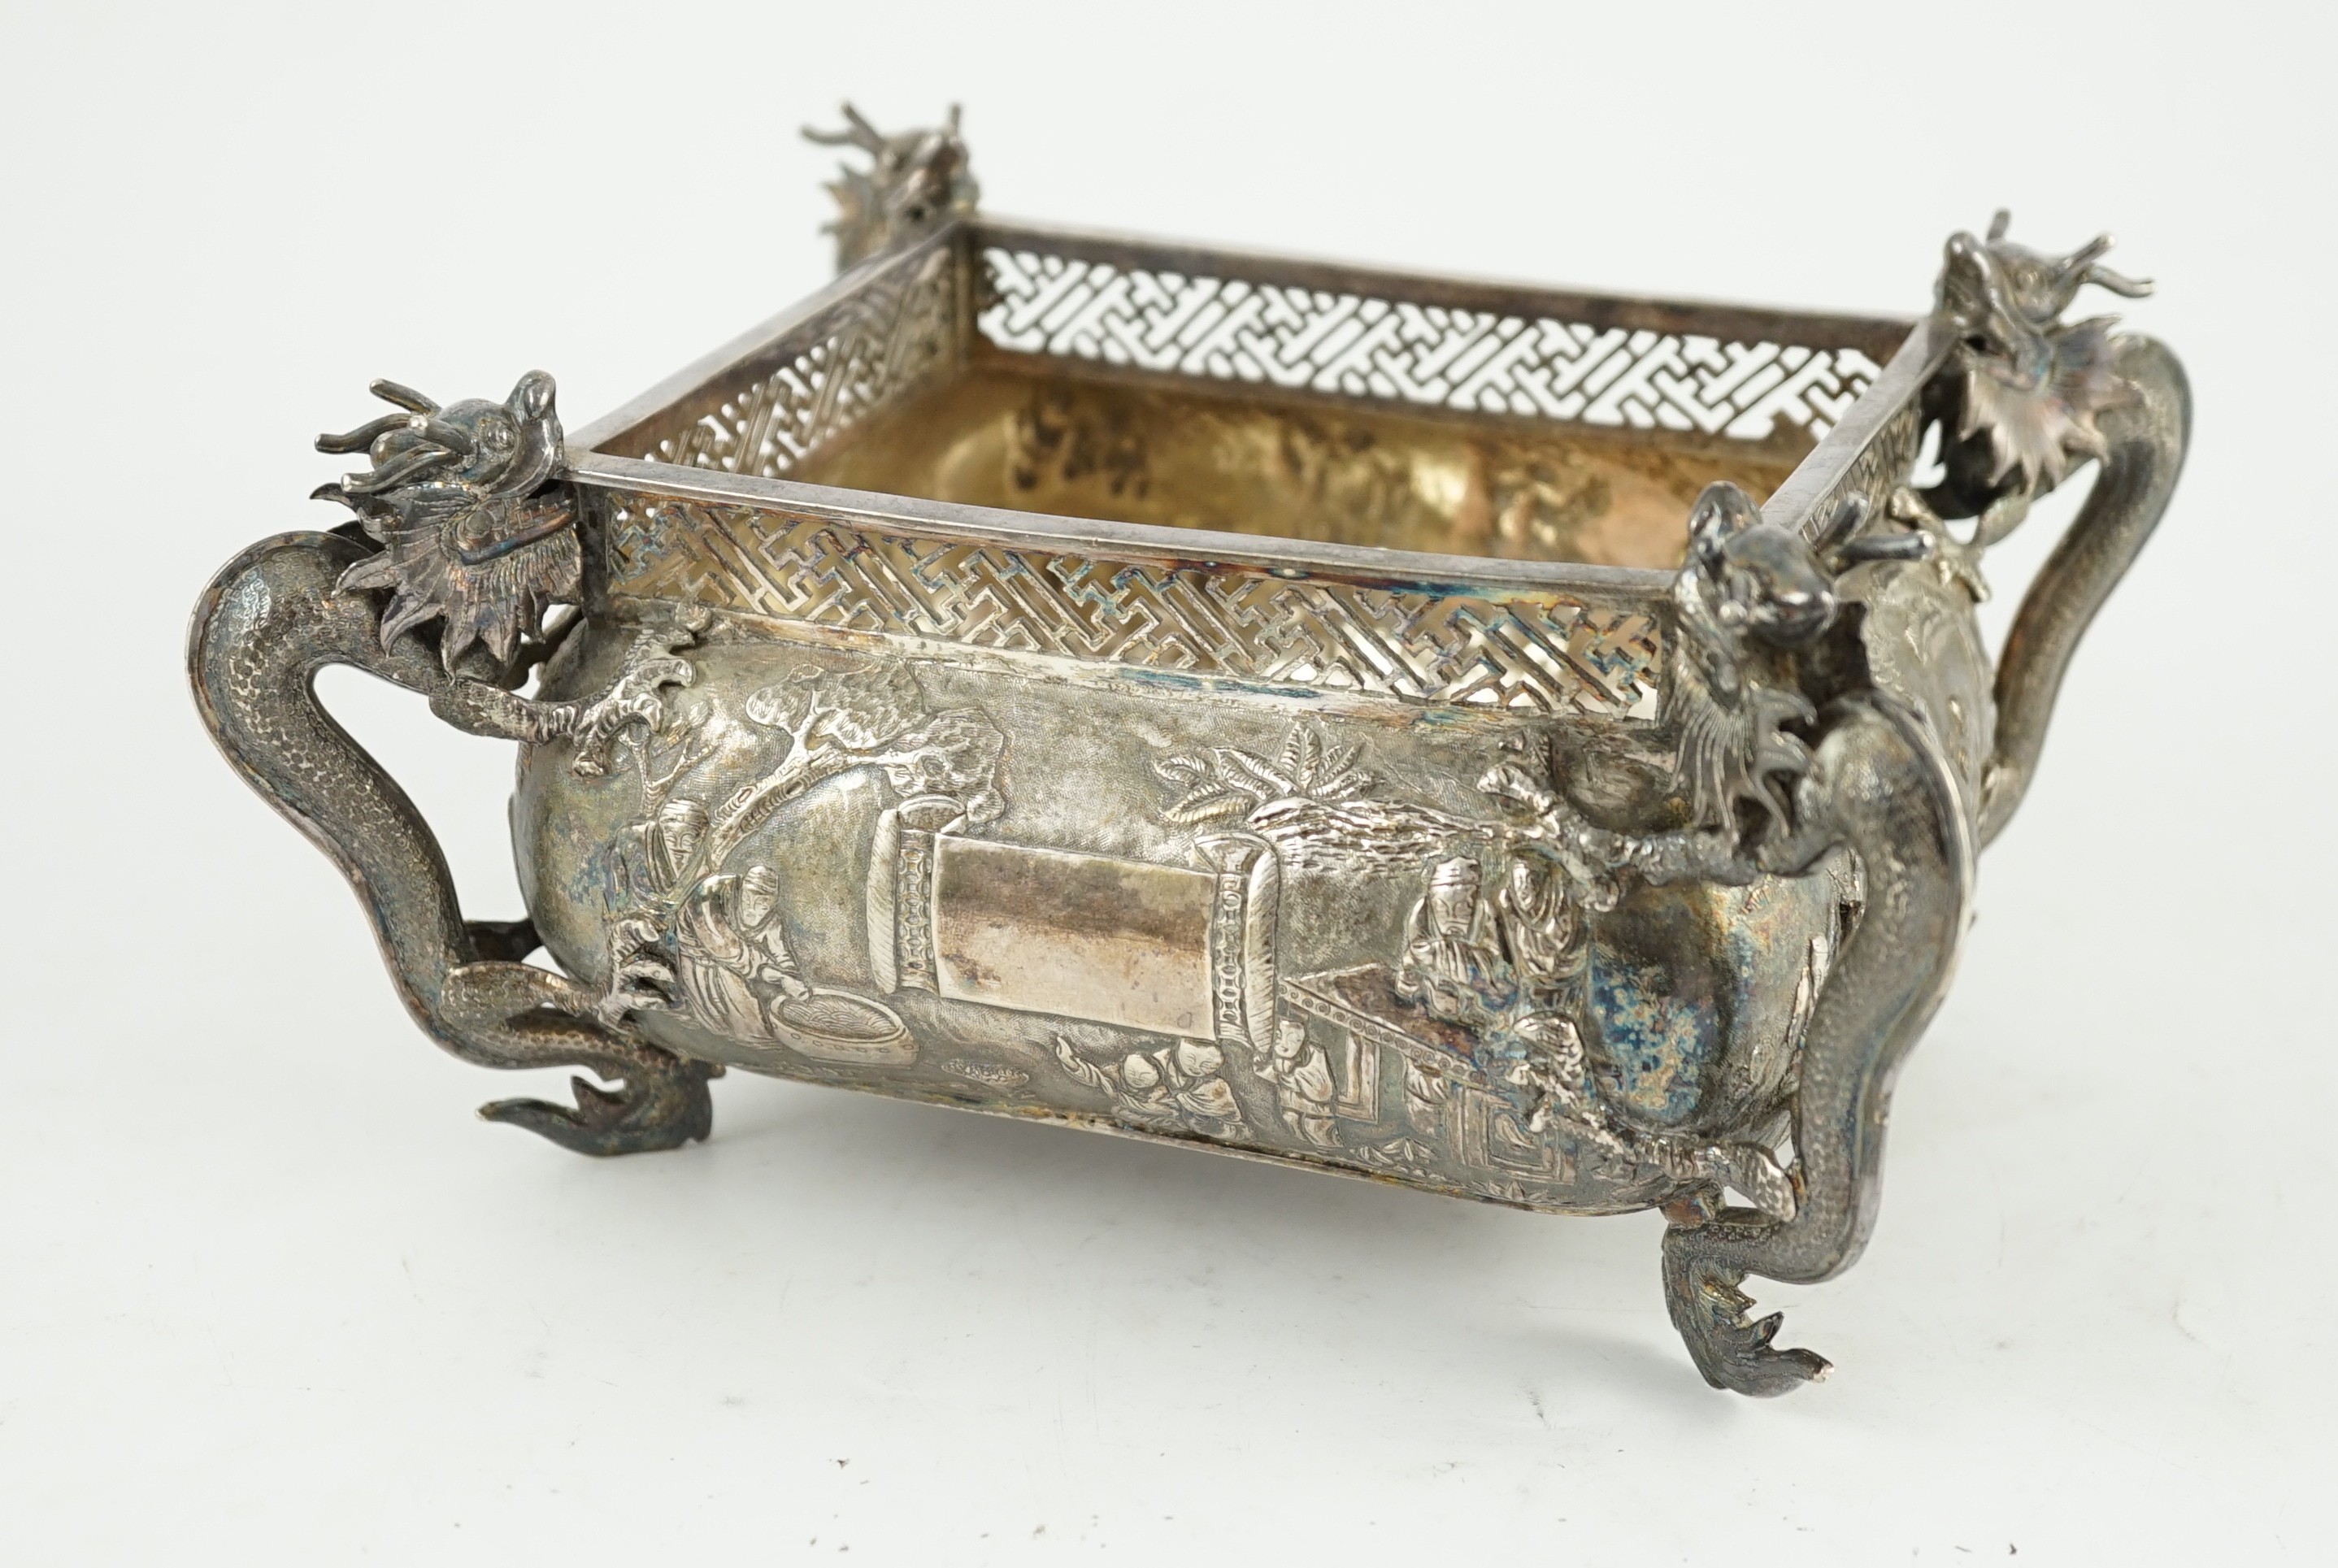 A late 19th/early 20th century Chinese Export silver planter, maker WC